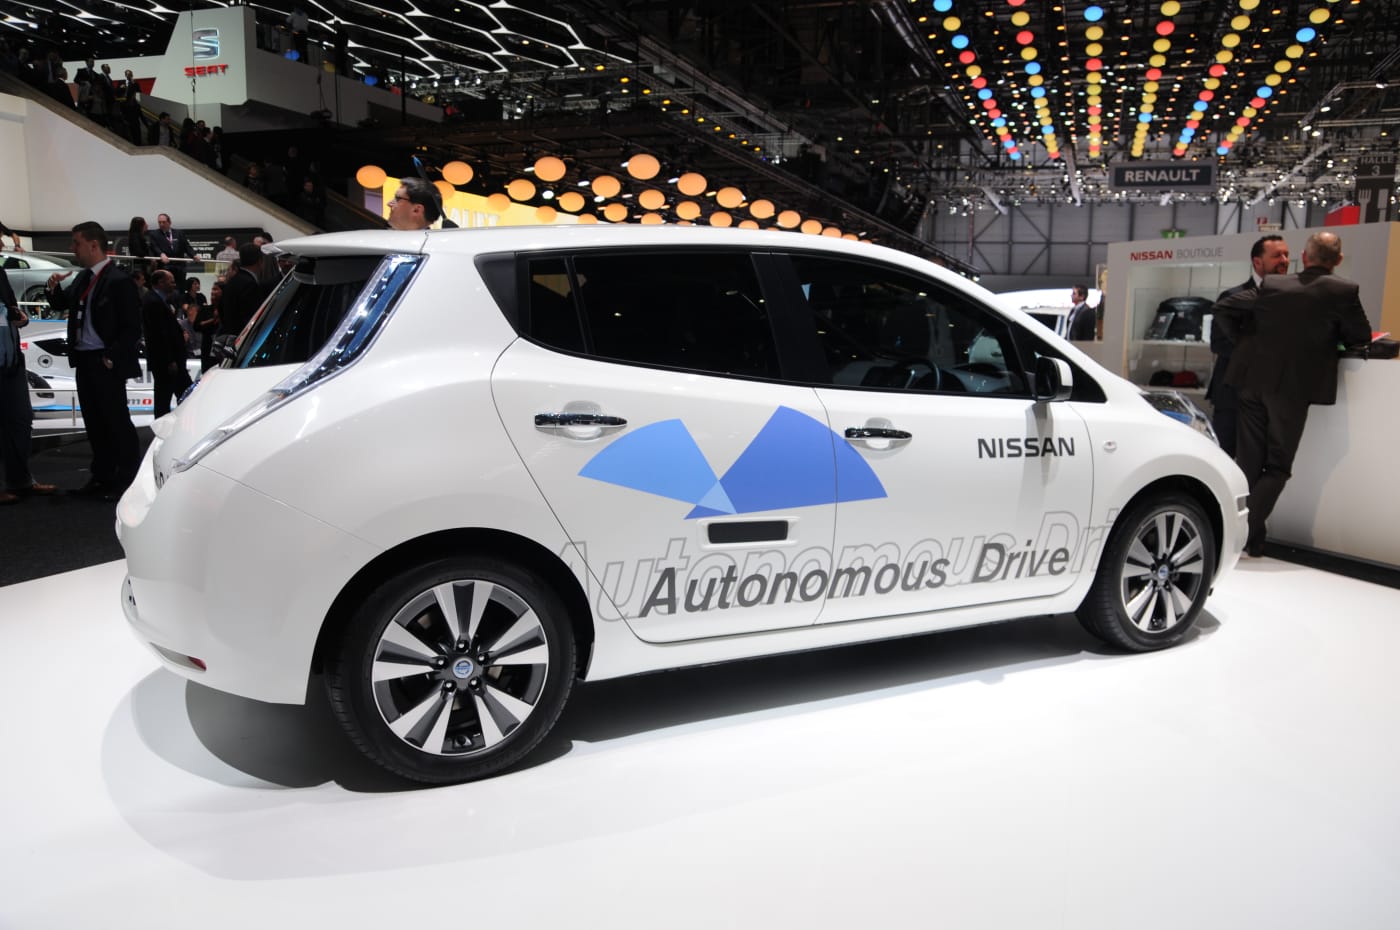 Photo of an autonomous car from Wikimedia Commons.